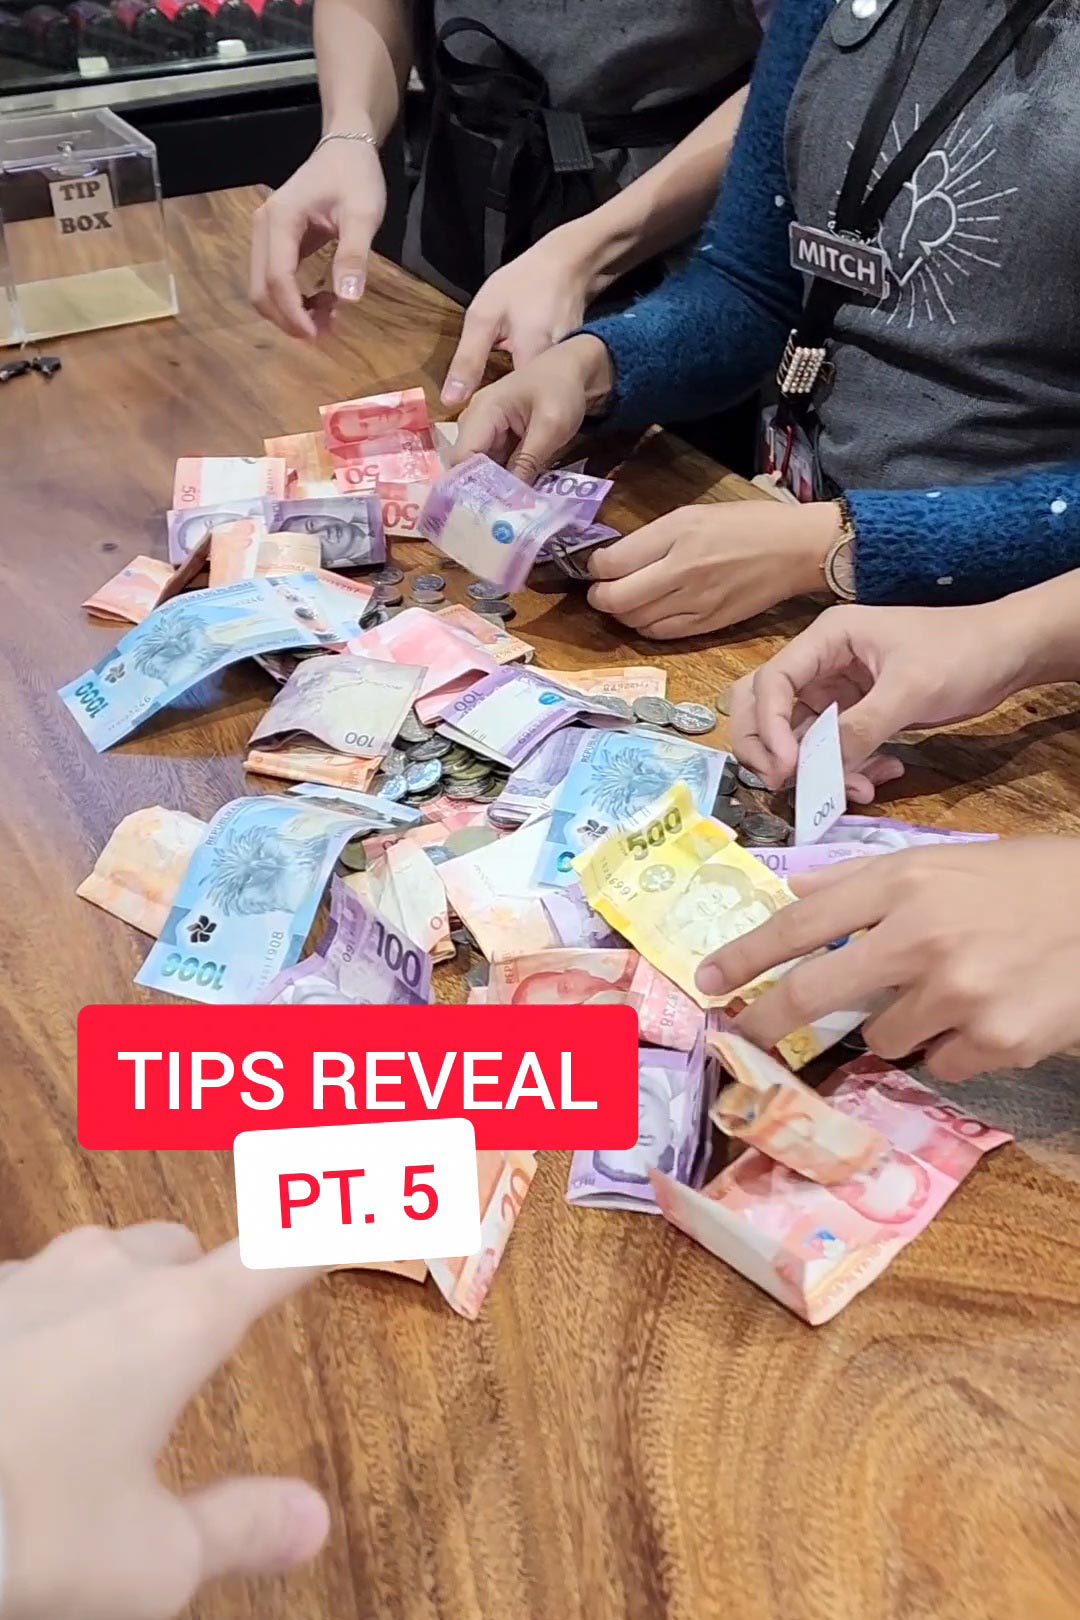 Tips Reveal Part 5!